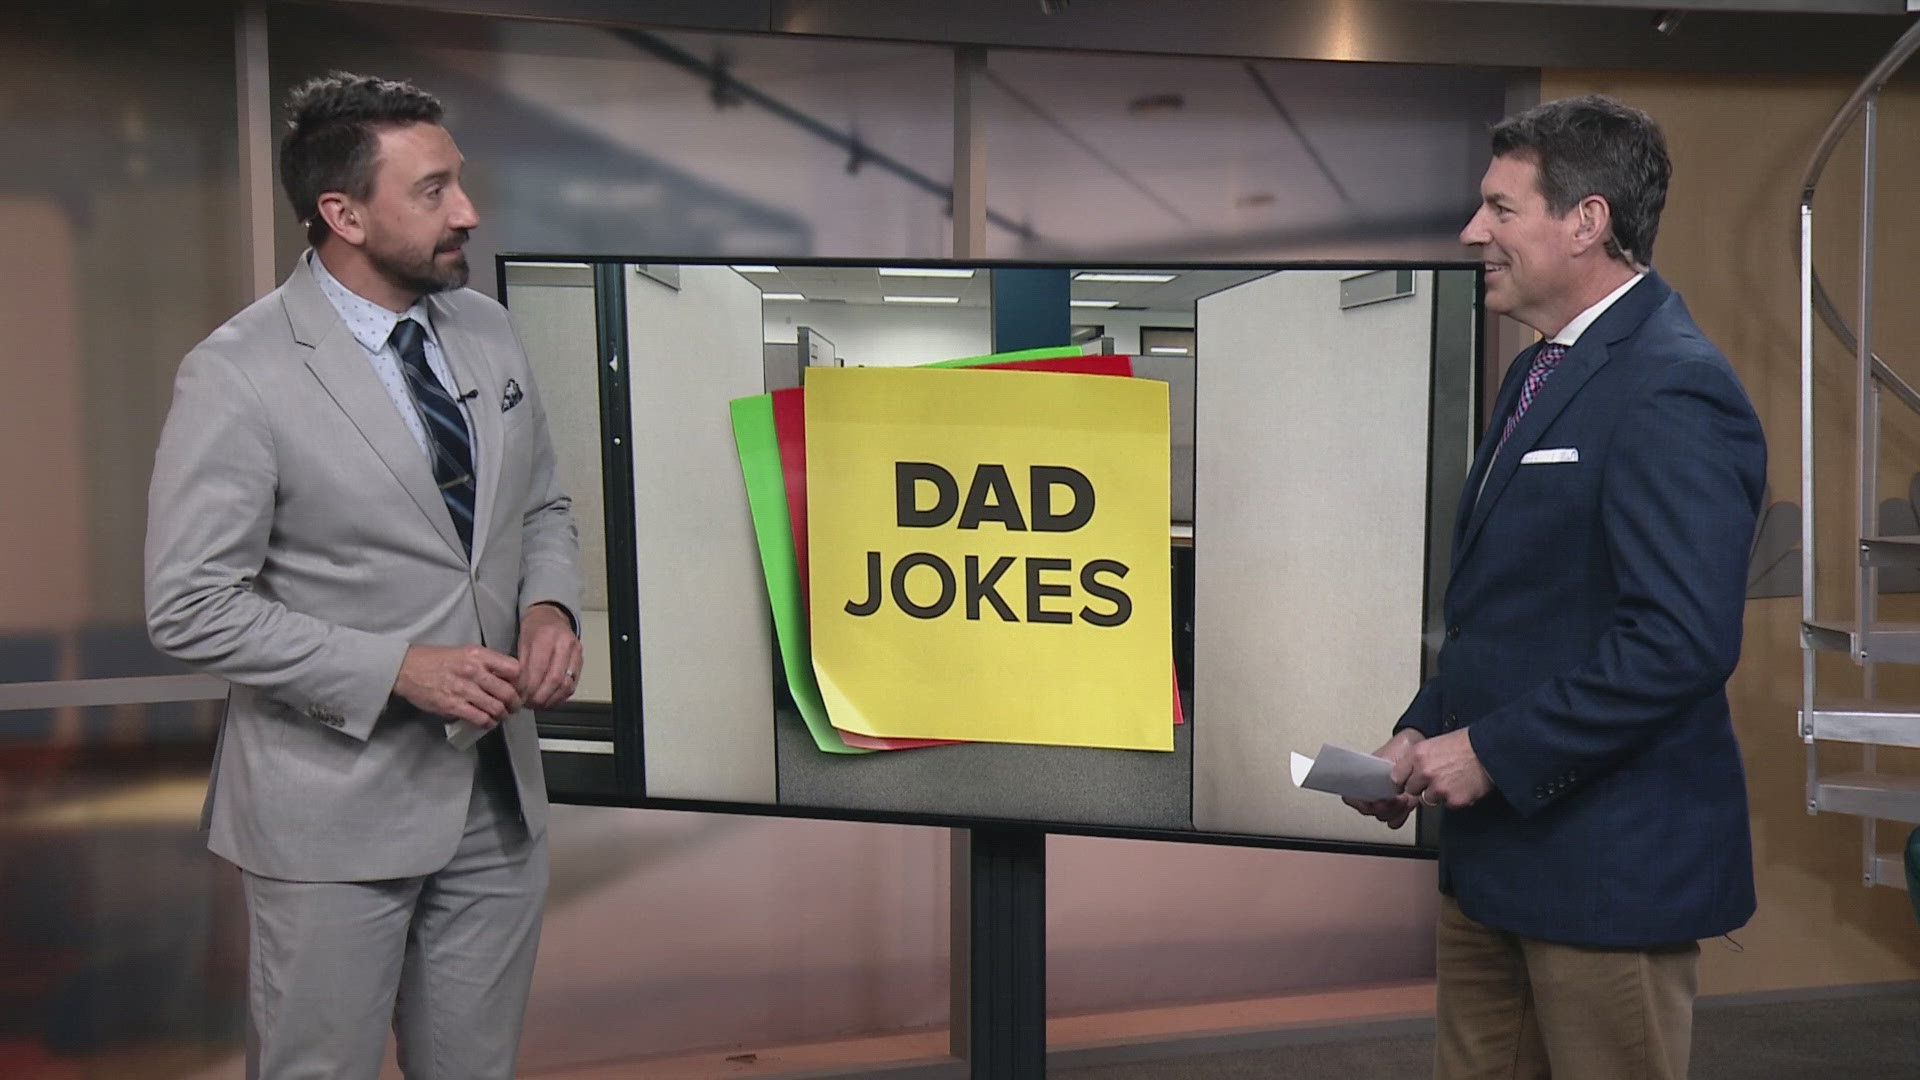 We're back with more dad jokes as 3News' Matt Wintz and Dave Chudowsky unleash more morning laughs.